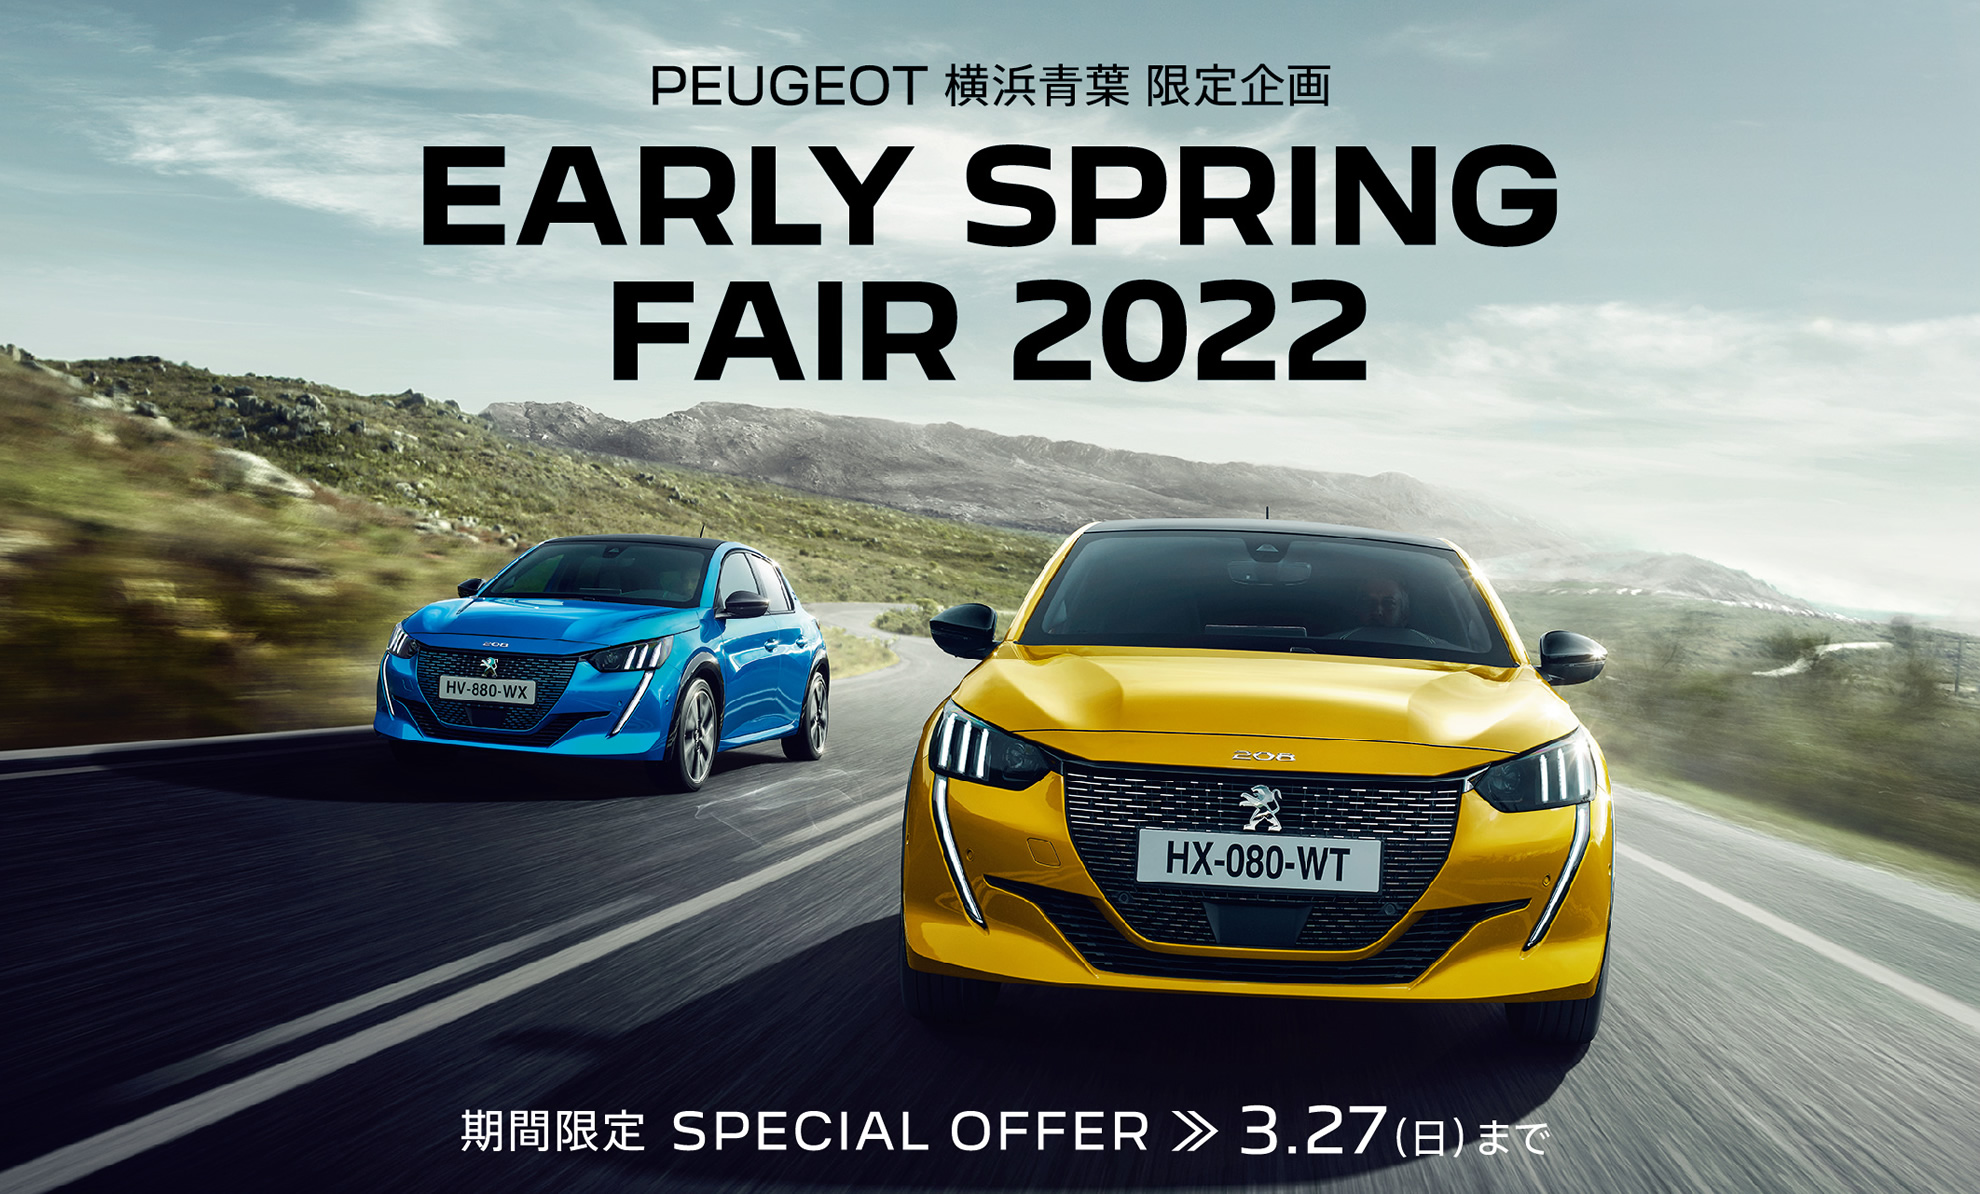 PEUGEOT 横浜青葉限定企画 | EARLY SPRING FAIR 2022 期間限定SPECIAL OFFER 3.27 SUN. まで